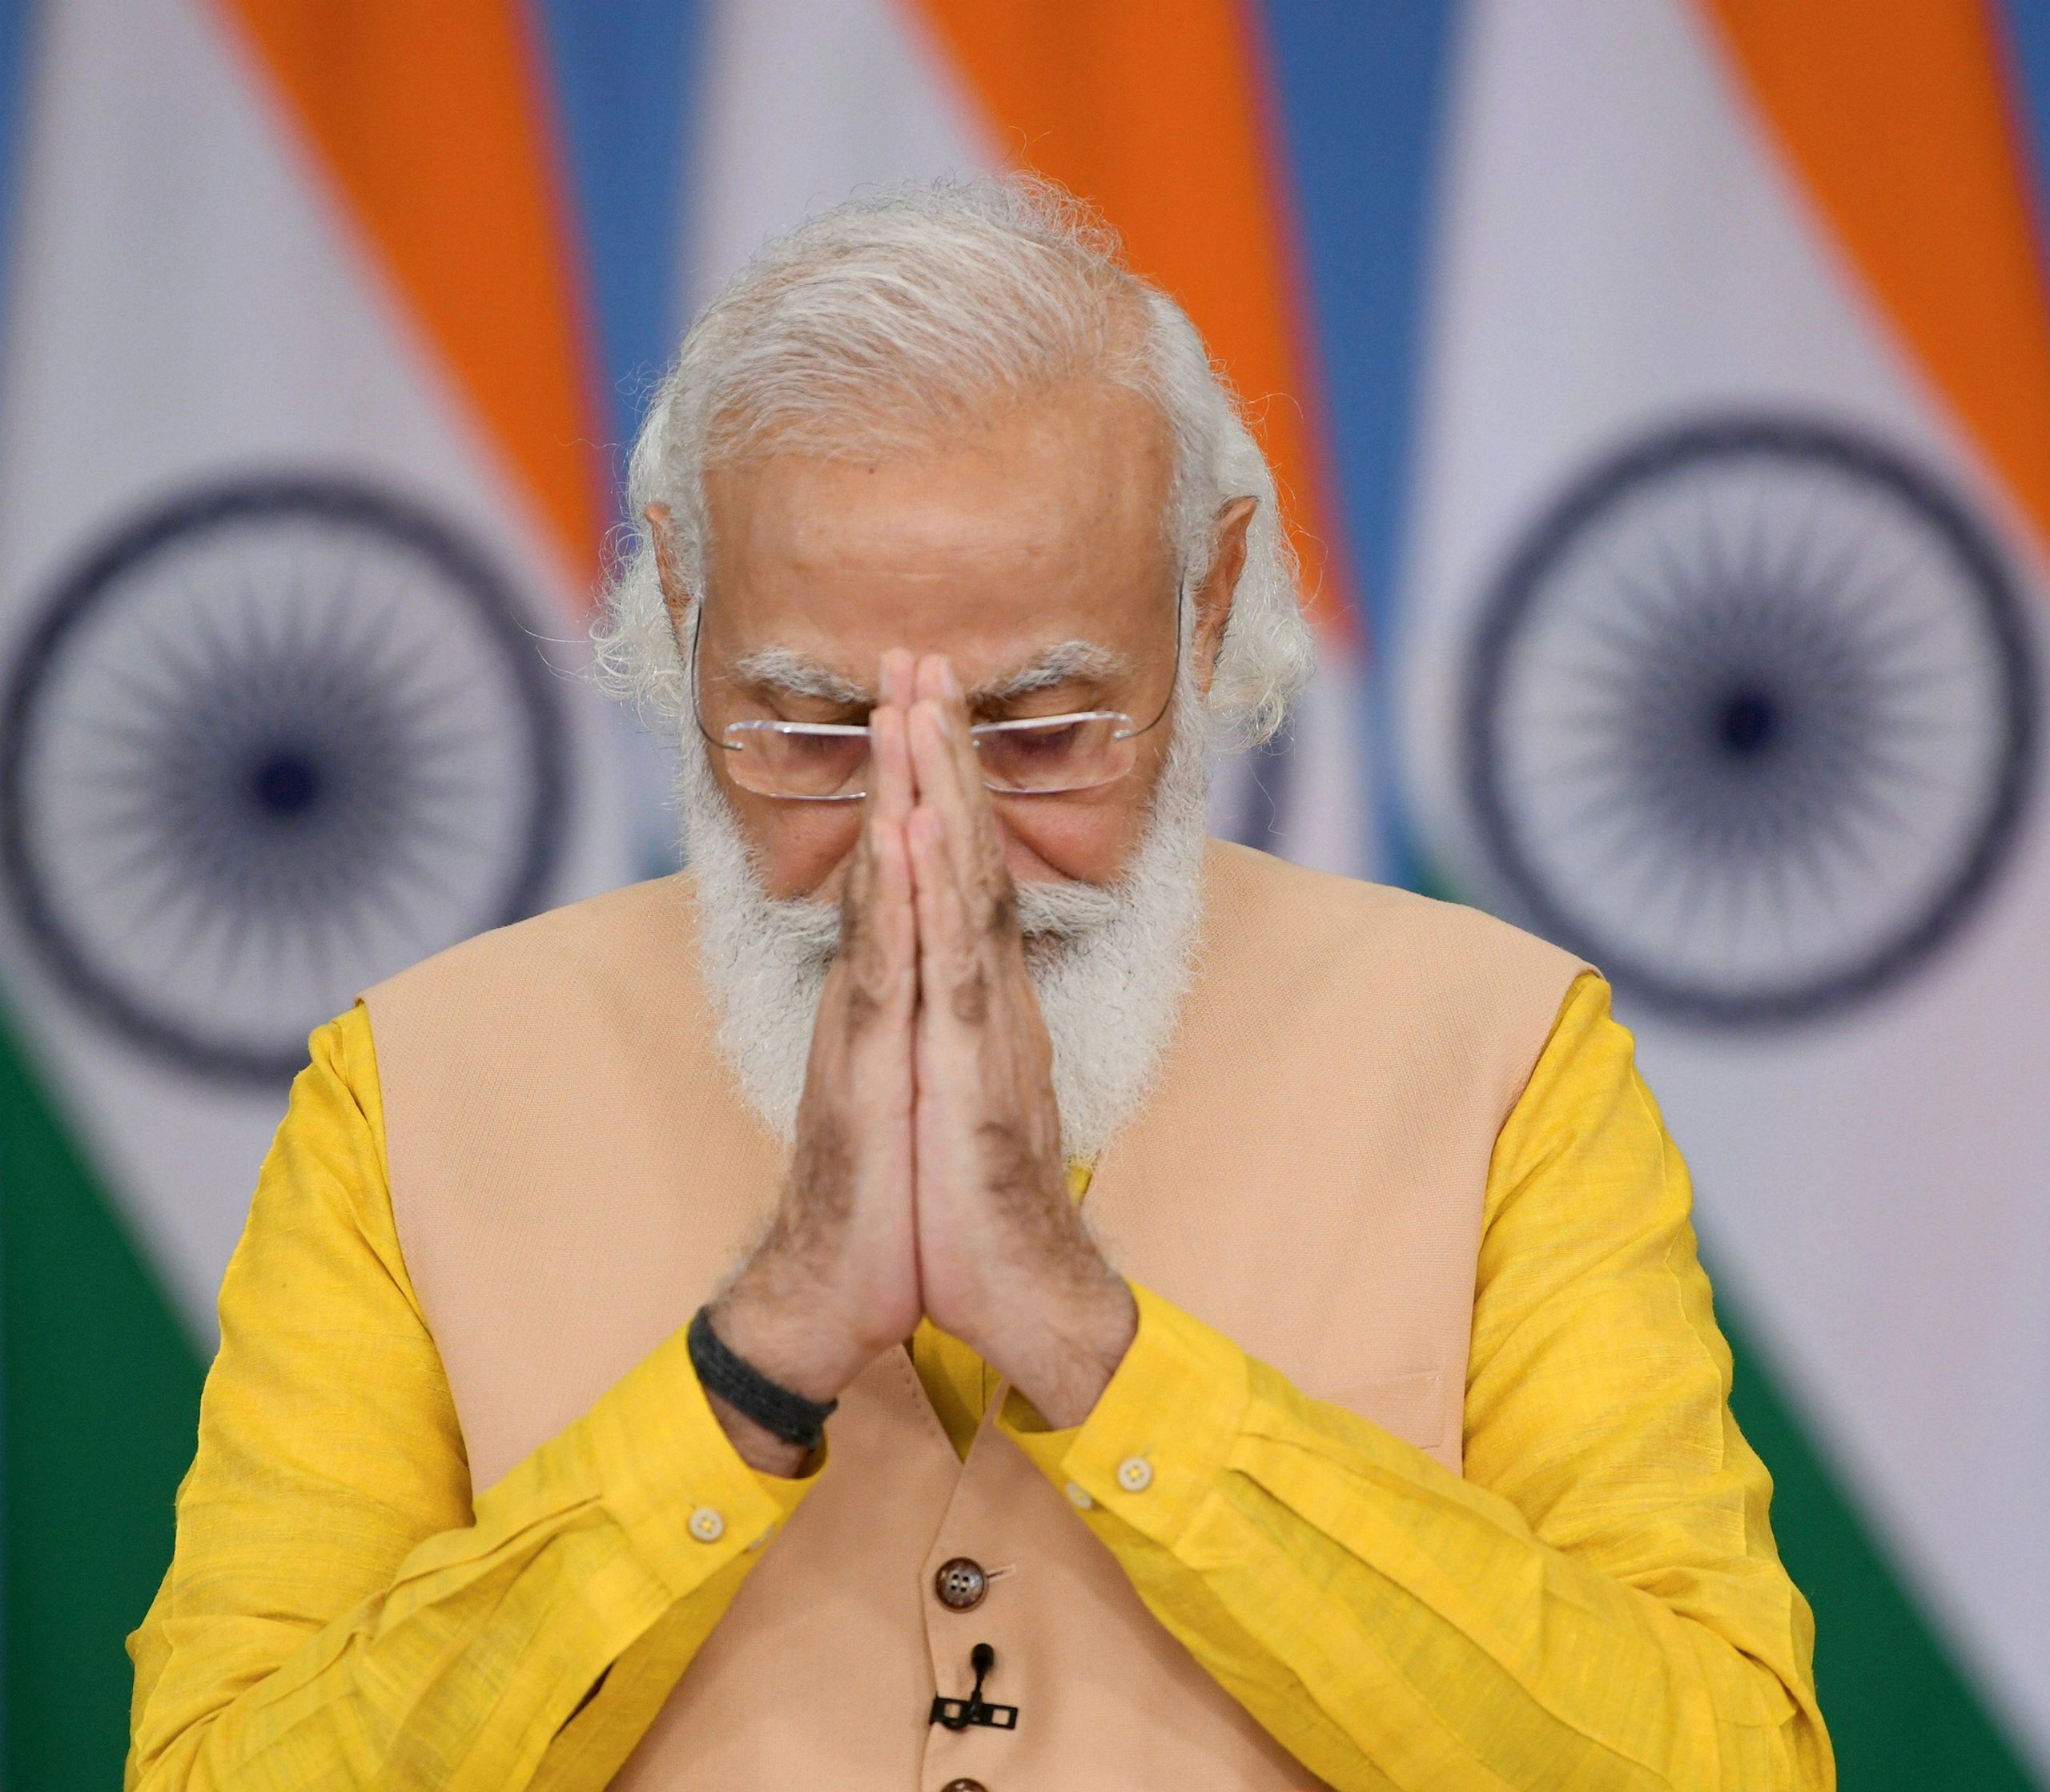 PM Modis approval rating highest among major world leaders: Report